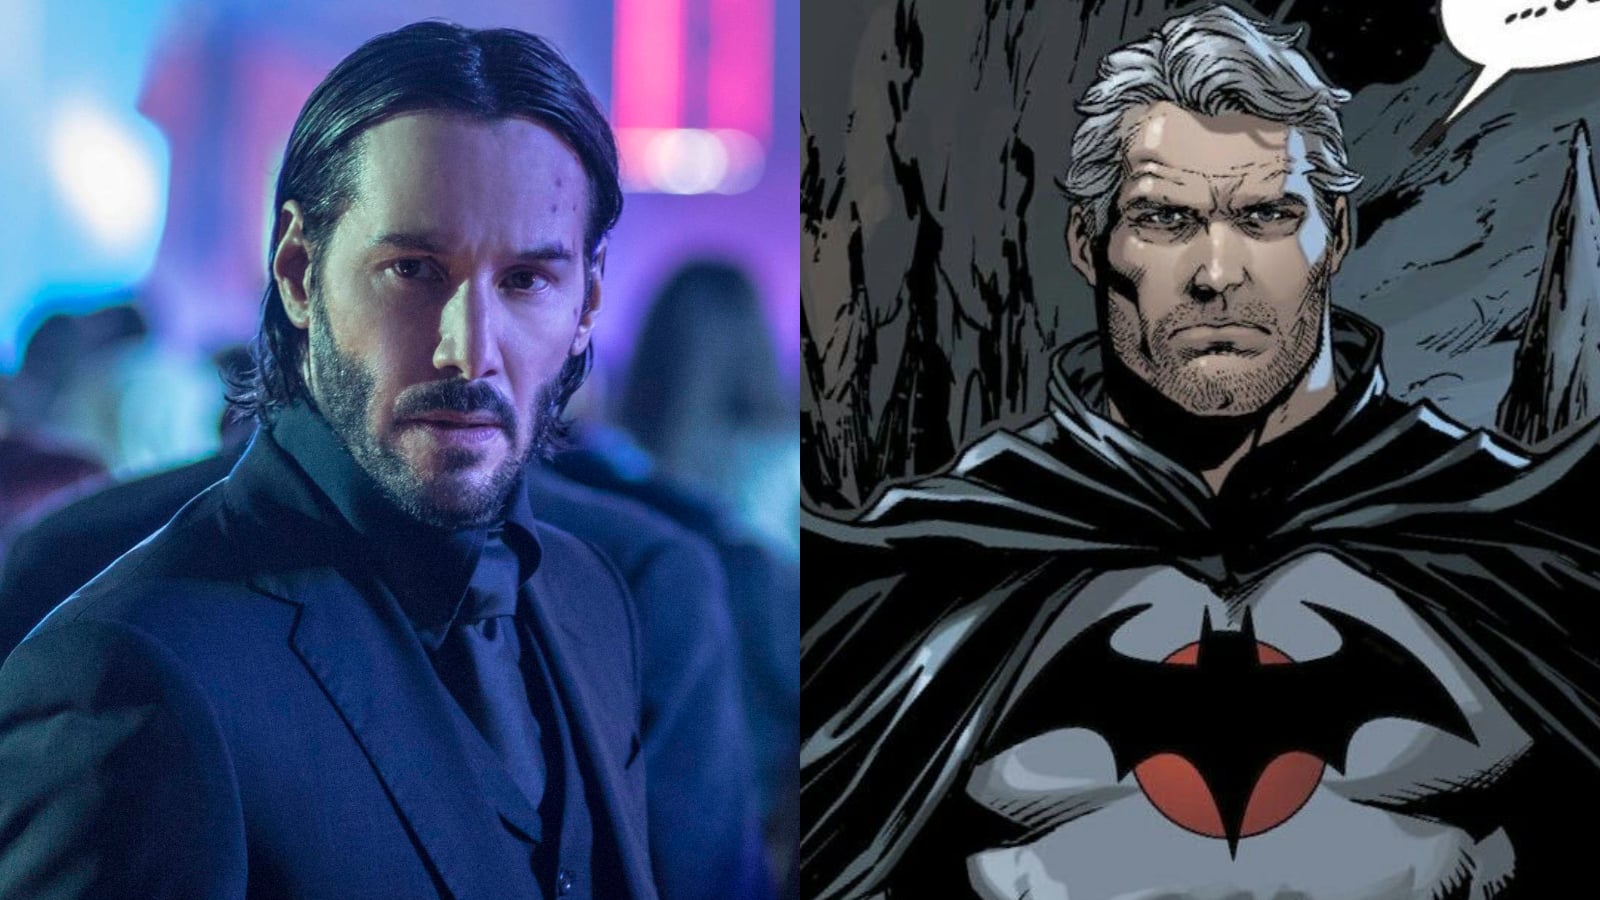 Keanu Reeves wants to play “older Batman” in live-action movie - Dexerto